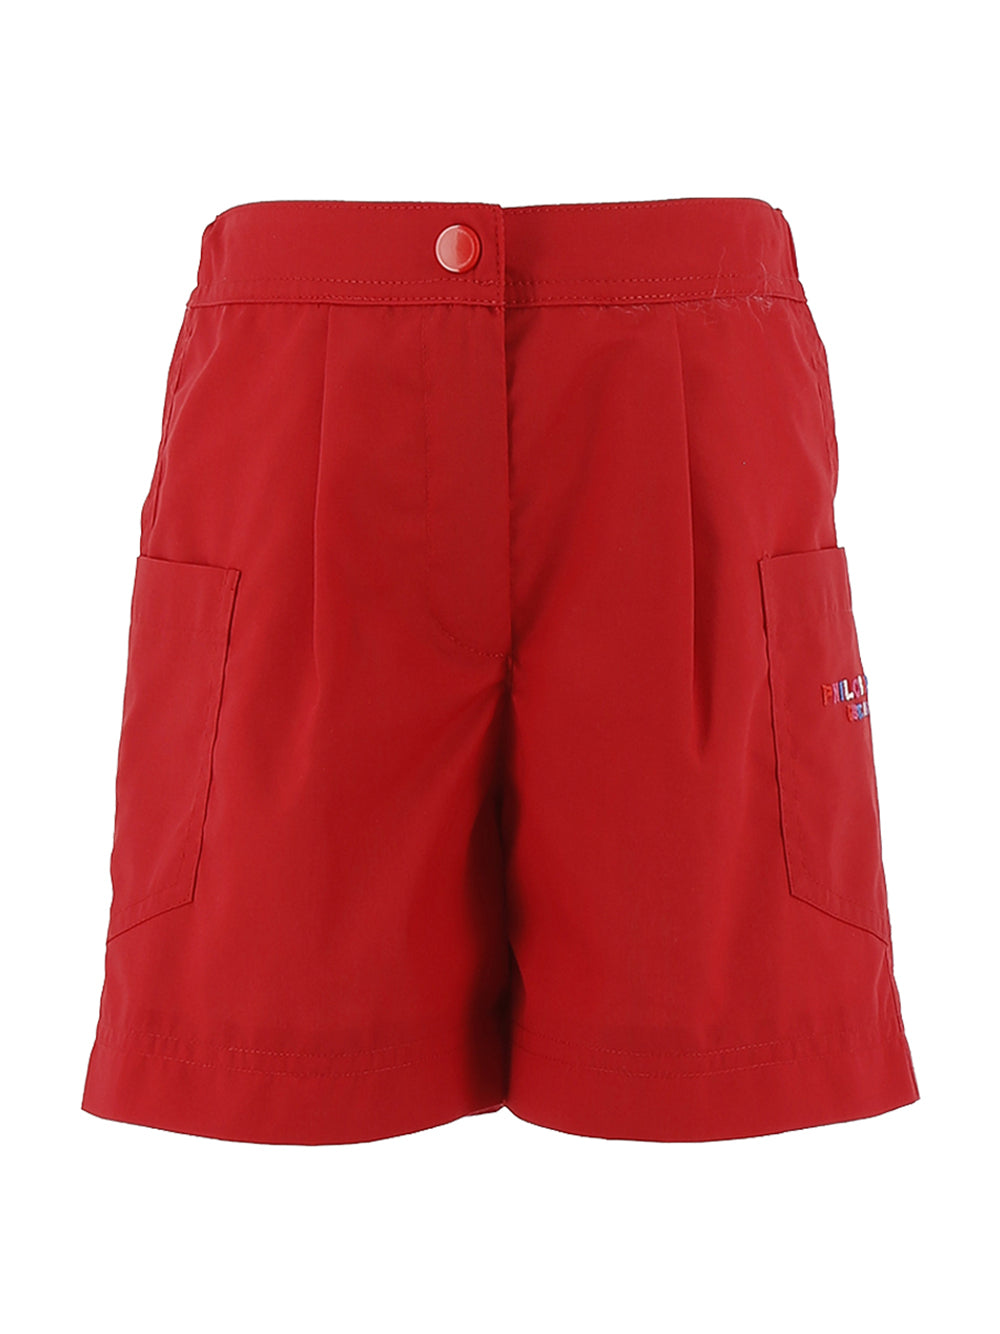 Red Pleated Philosophy Shorts